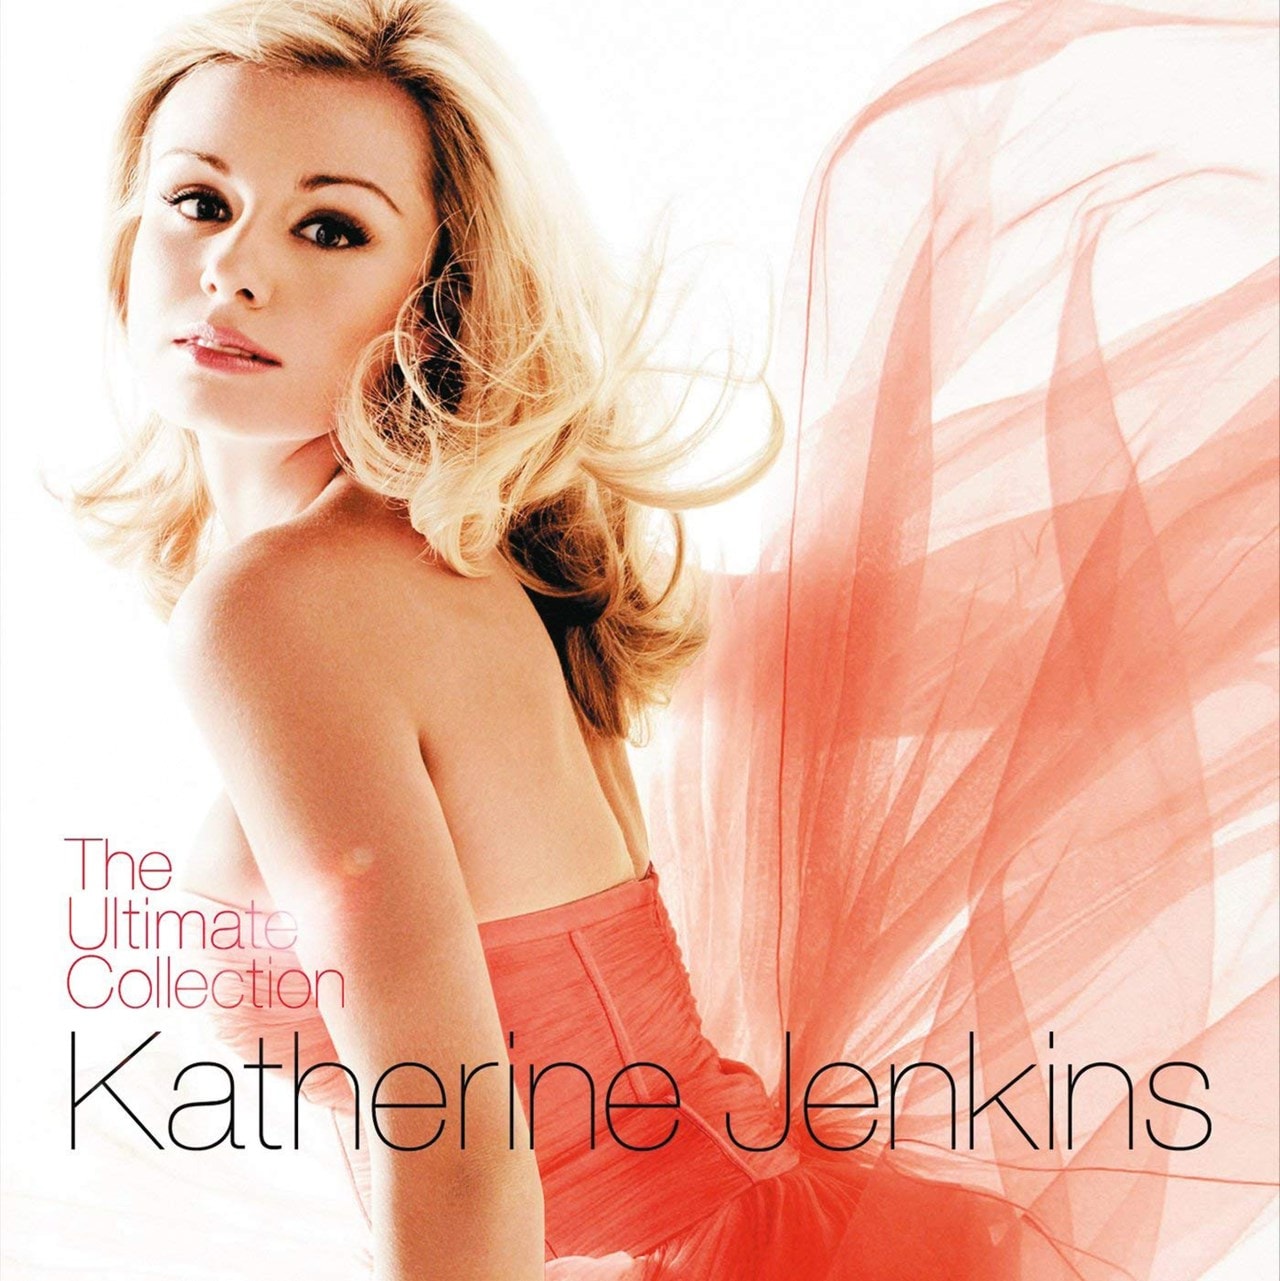 KATHERINE JENKINS: THE ULTIMATE COLLECTION